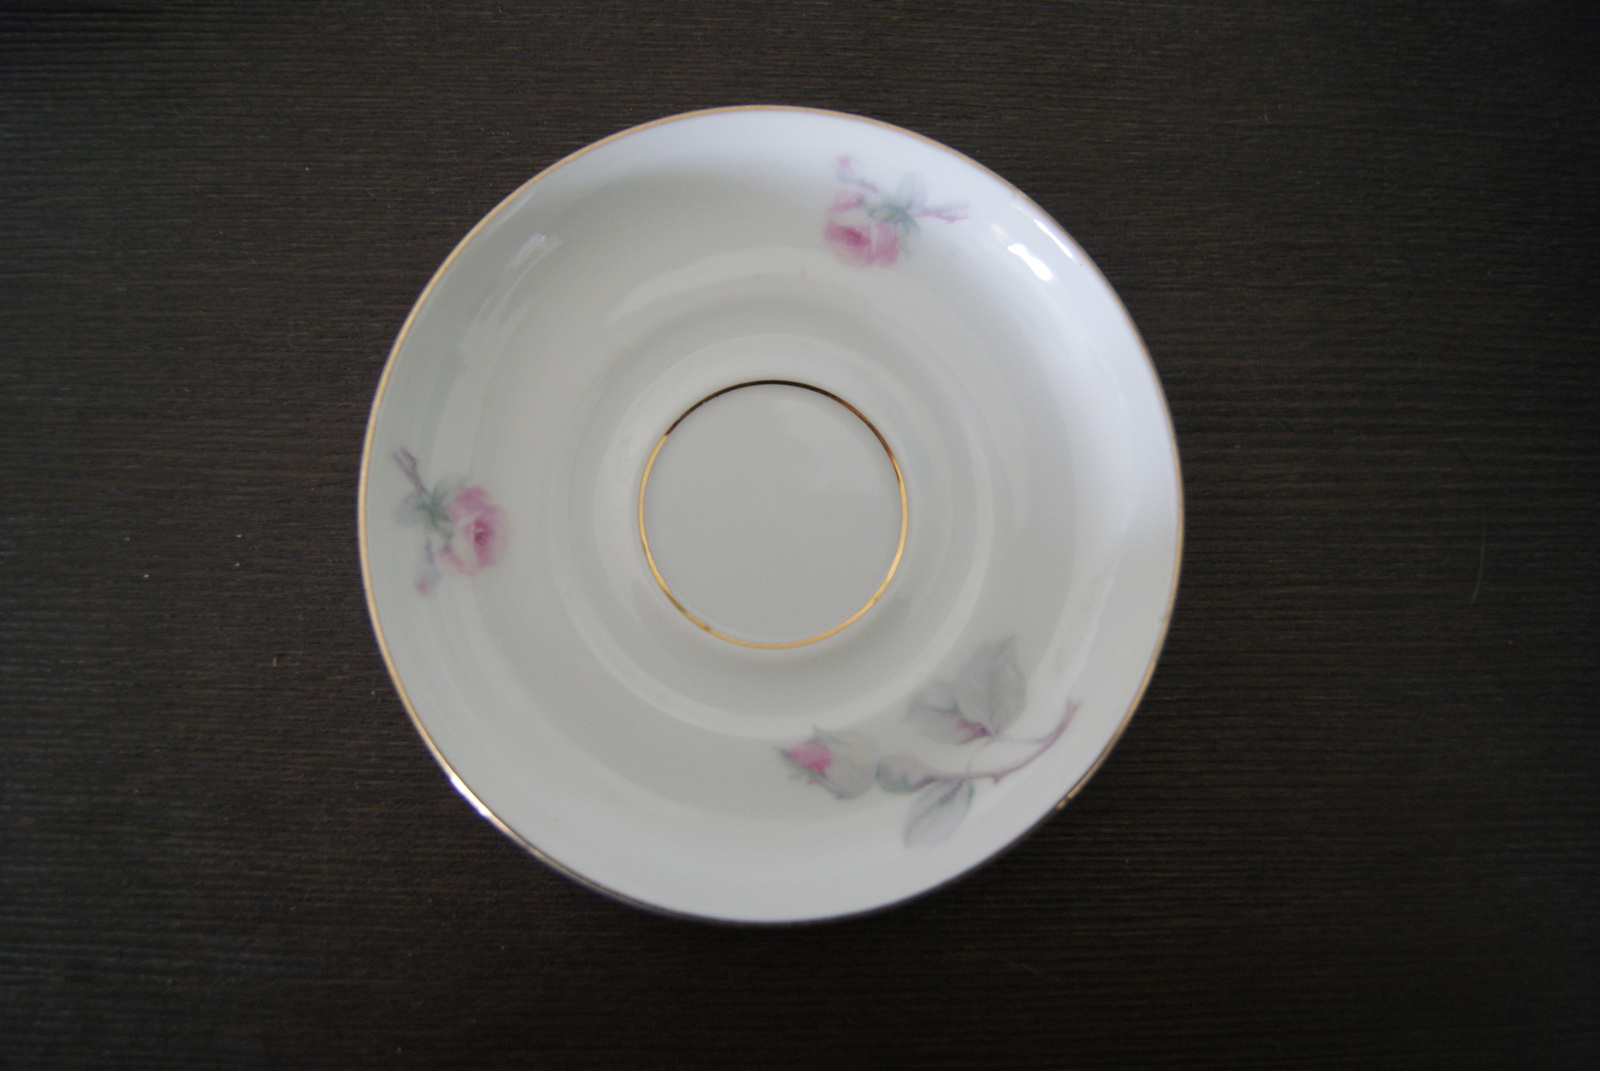 Porsgrund cup with saucer and plate with roses and leaves